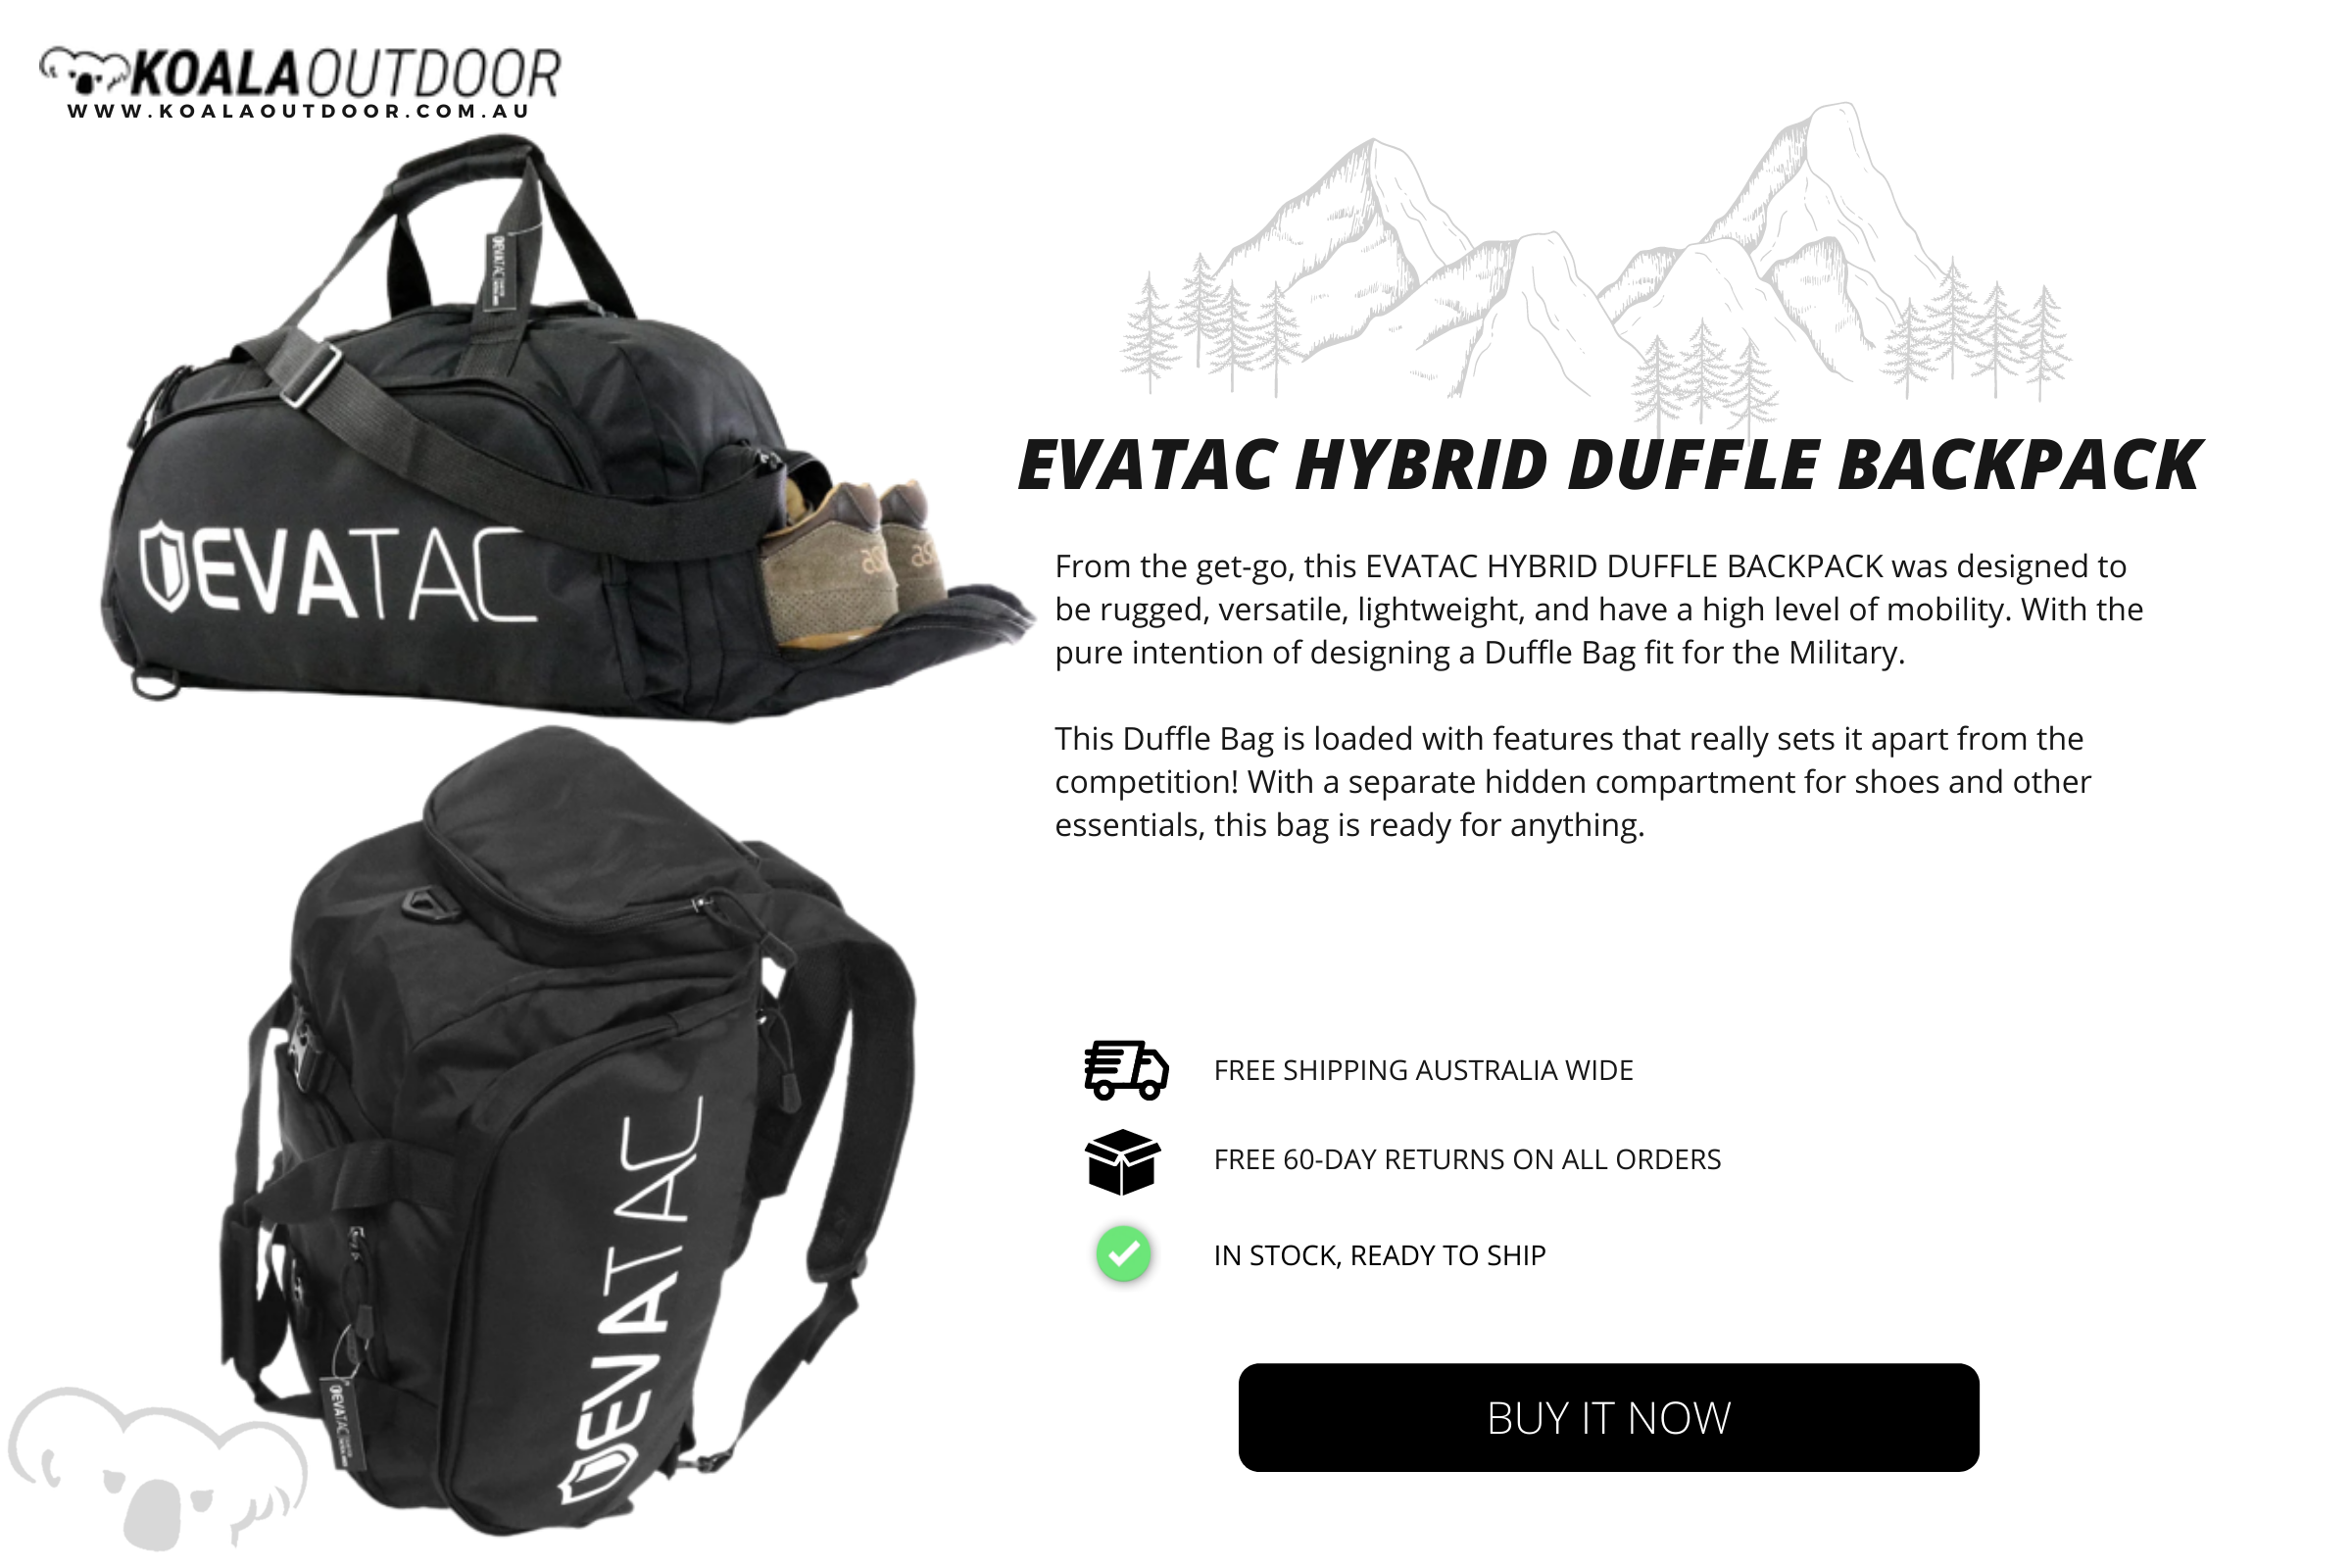 Evatac duffle backpack with shoe compartment